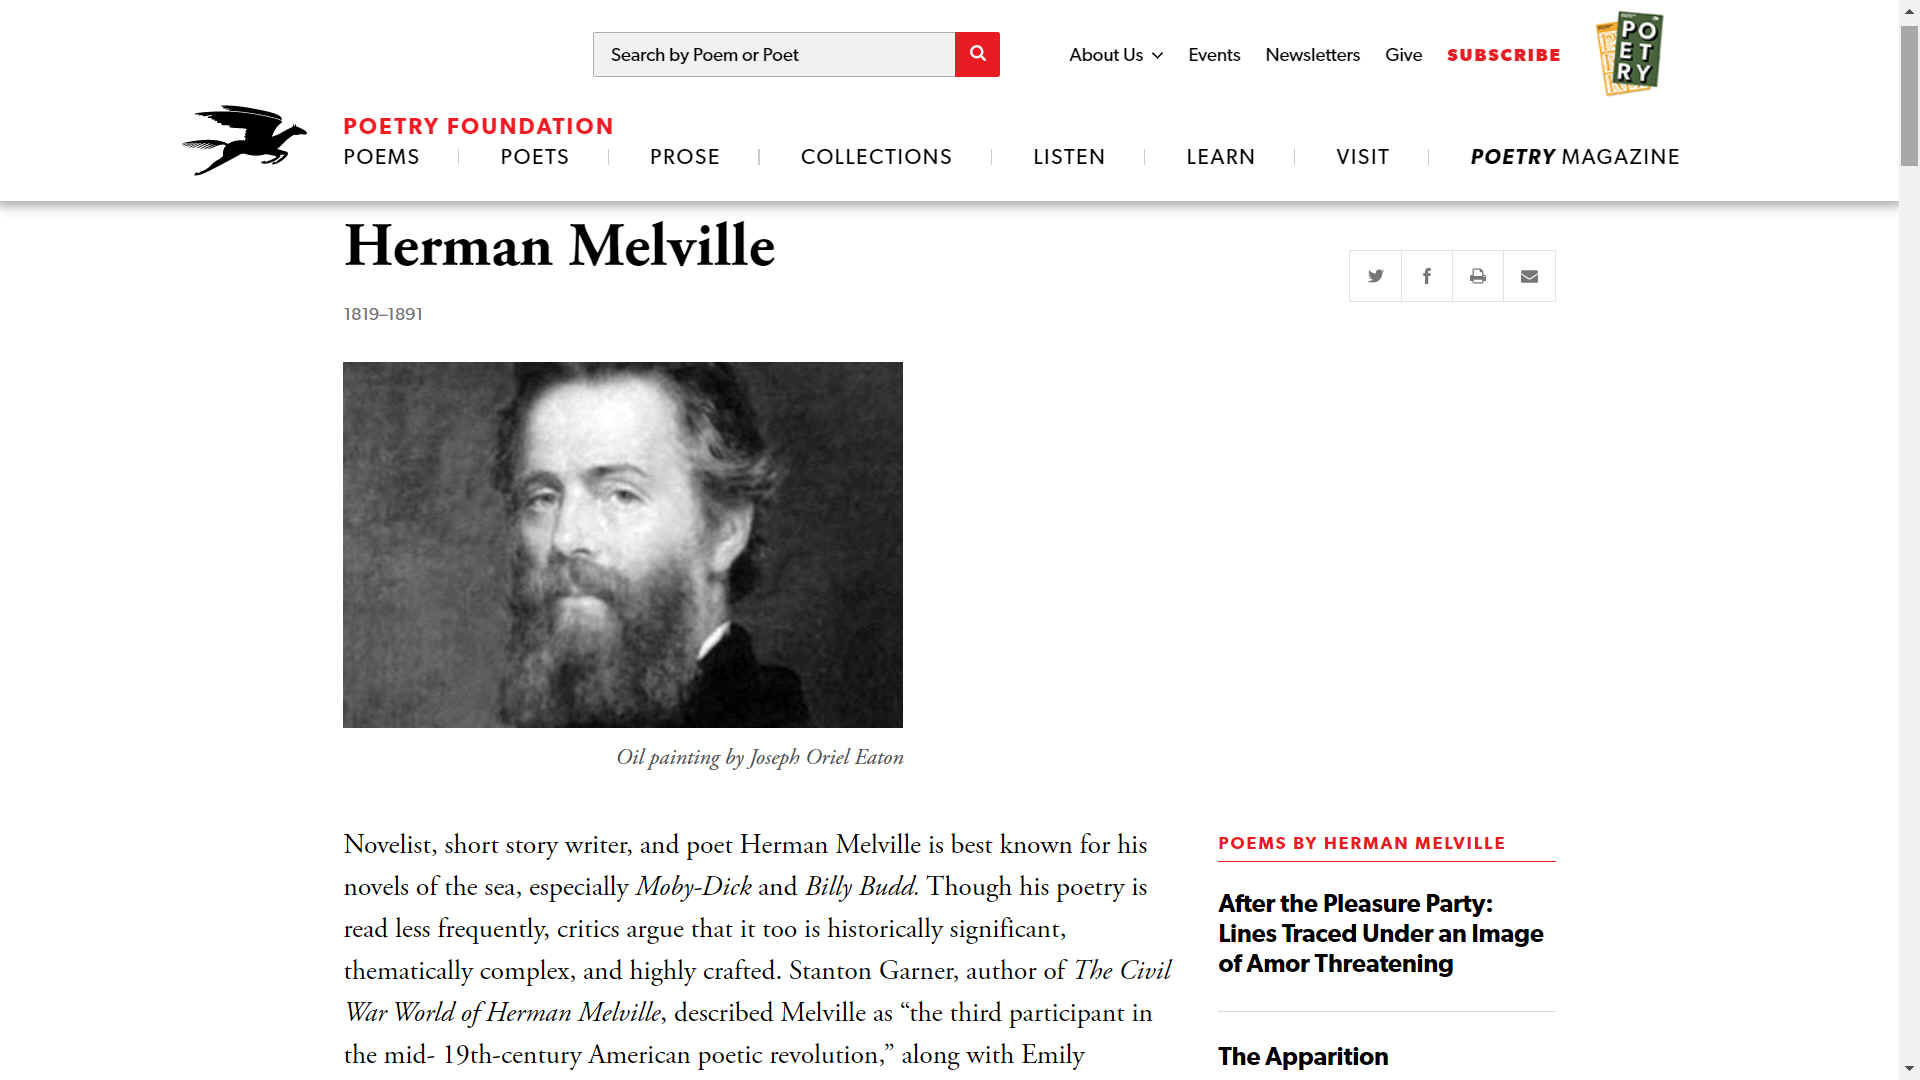 The Poetry Foundation, Poets, Herman Melville